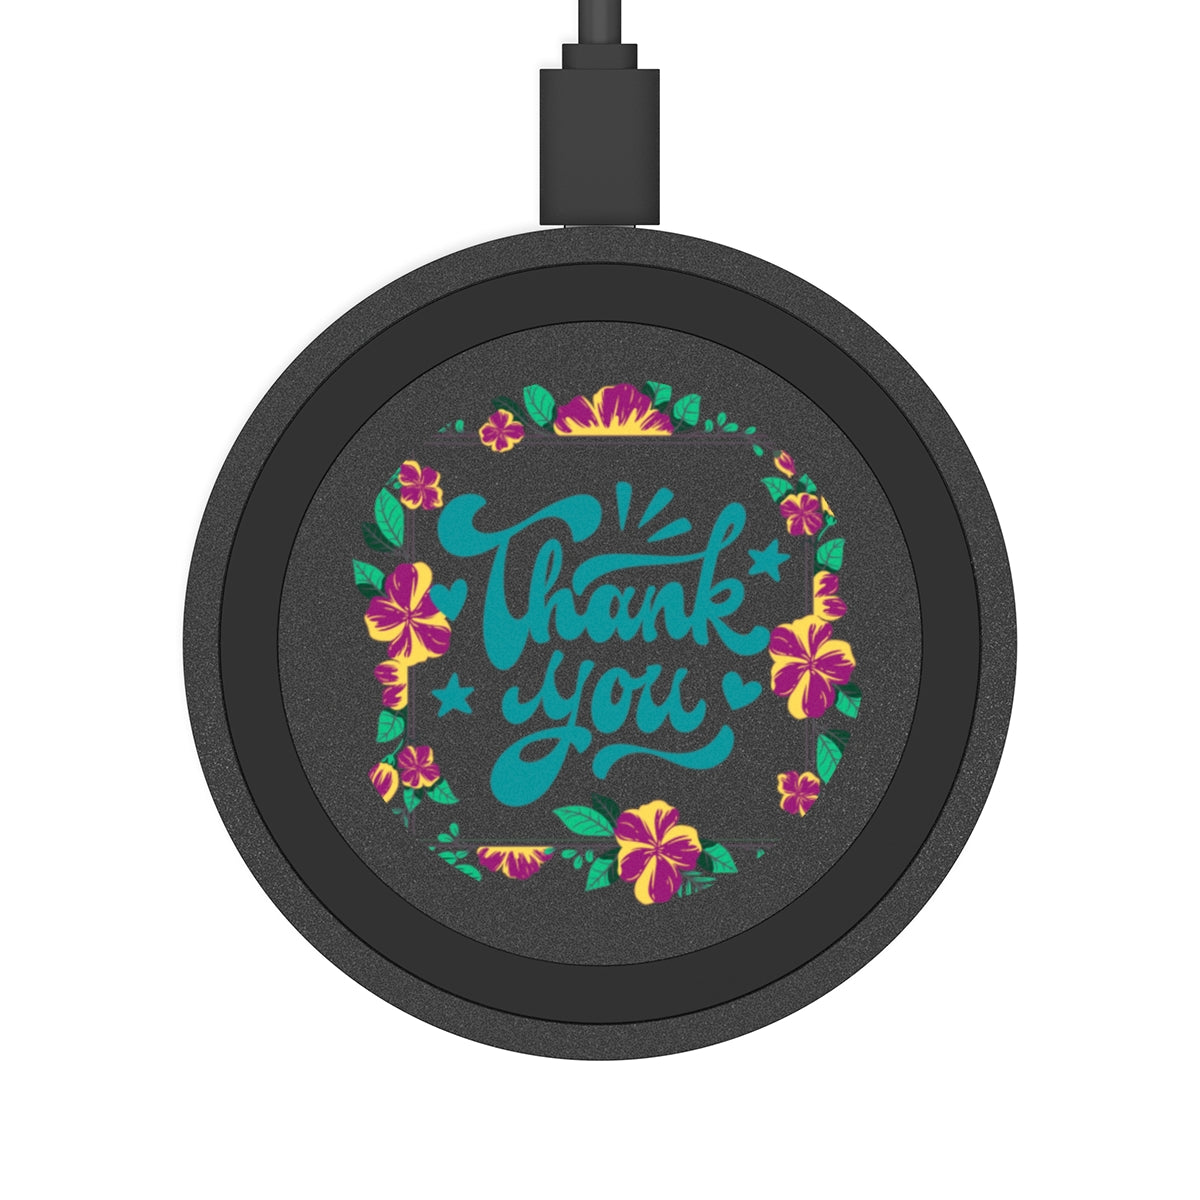 Thank you Inspirational gifts Wireless Charging Pad